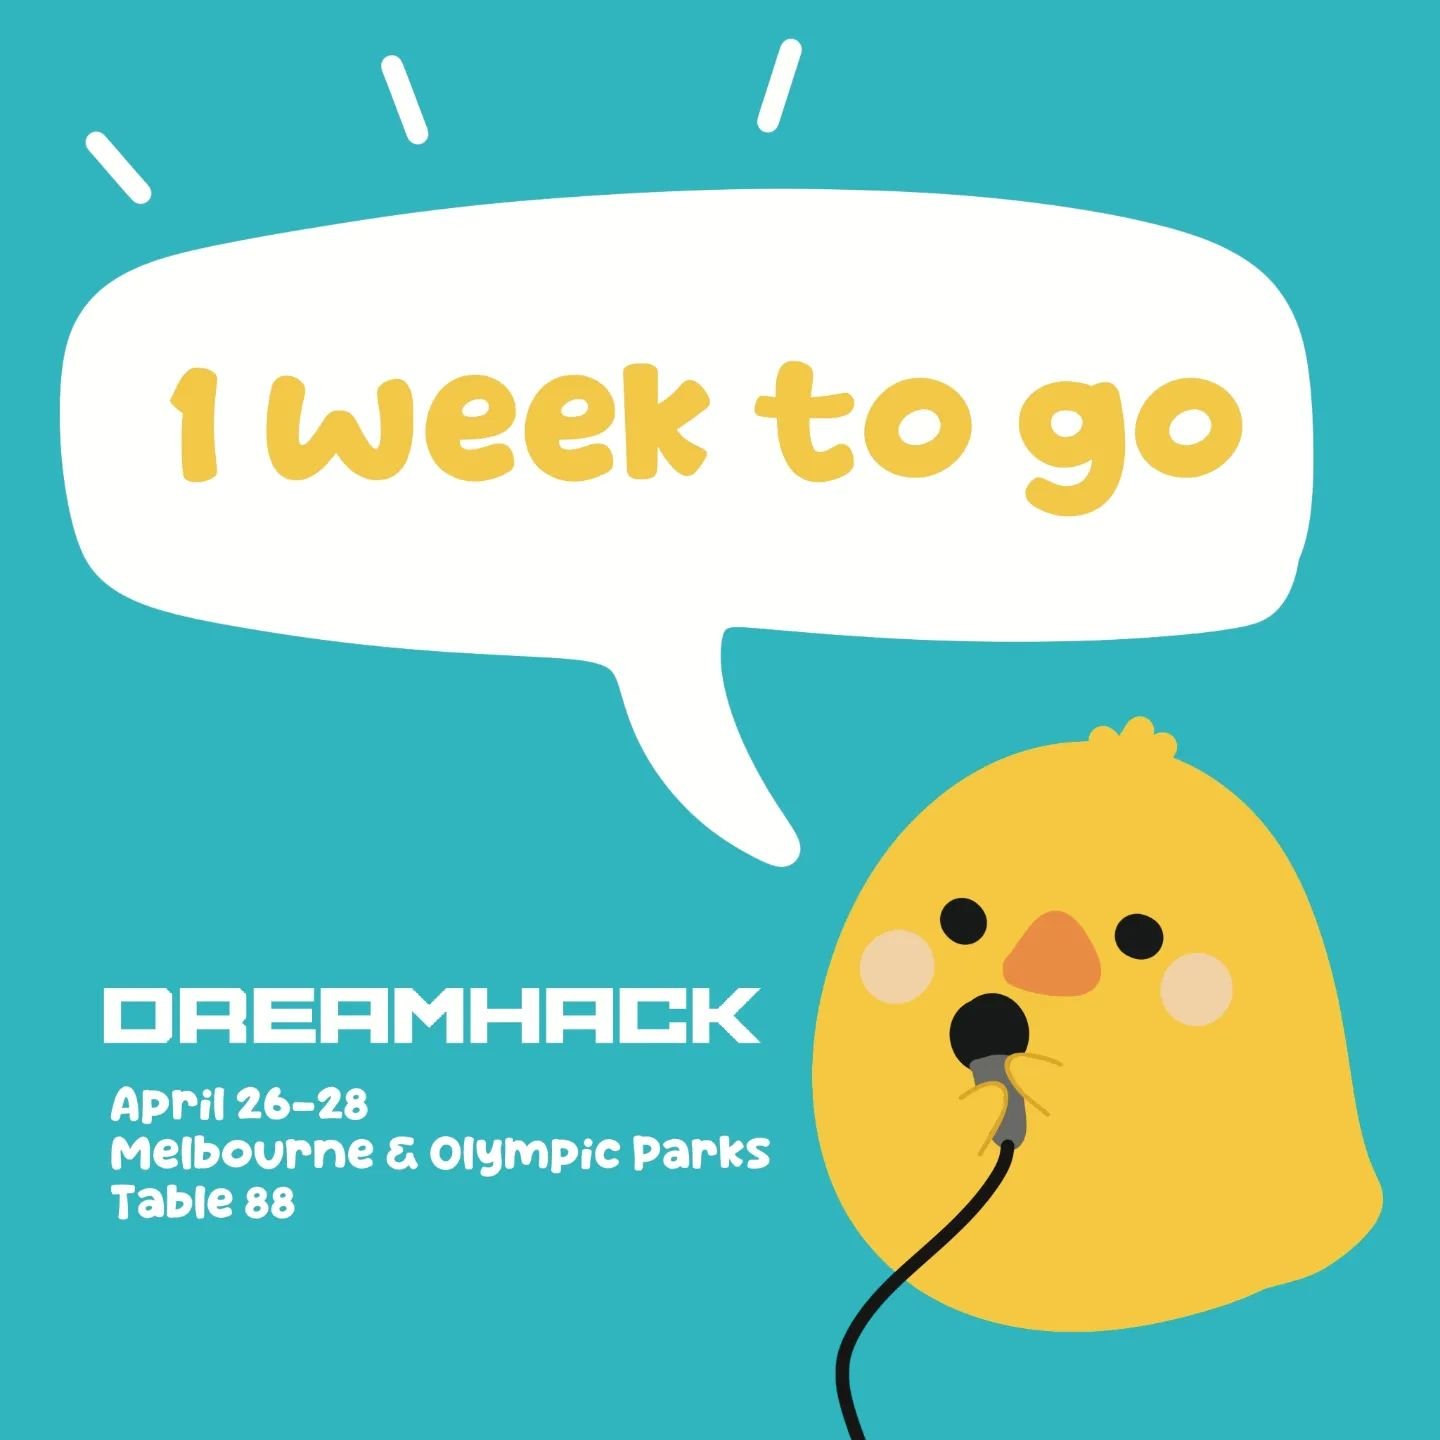 ✨️🙌🏻Only one week away for @dreamhackau !OMG!
Swipe to see the whole map.

🎮 Dreamhack Melbourne
📅 26th- 28th April
❣️Melbourne &amp; Olympic Parks (I'm at Table 88)

Yes, it is a three days event. Can't wait to see you all there!💛

#dreamhack #